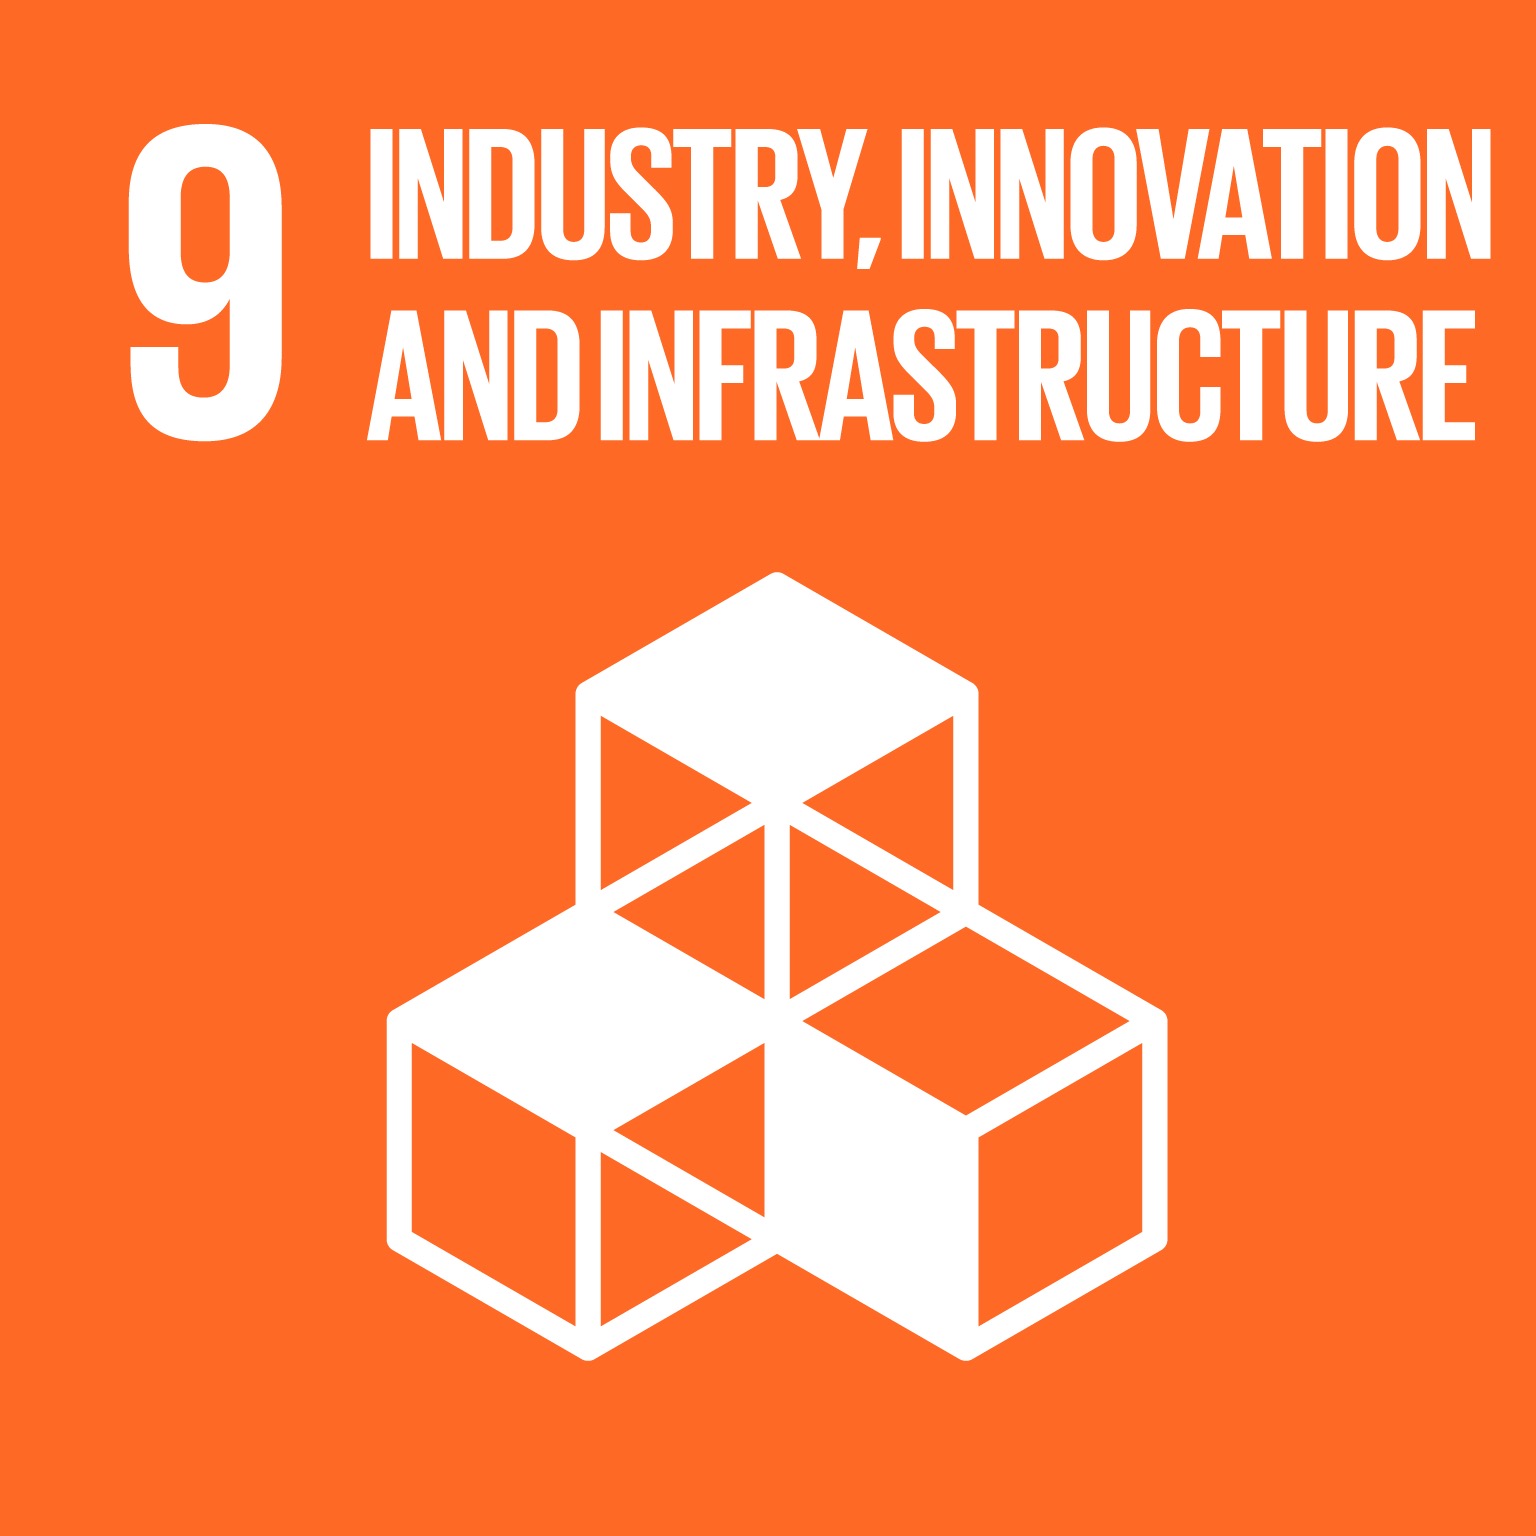 INDUSTRY, INNOVATION, AND INFRASTRUCTURE